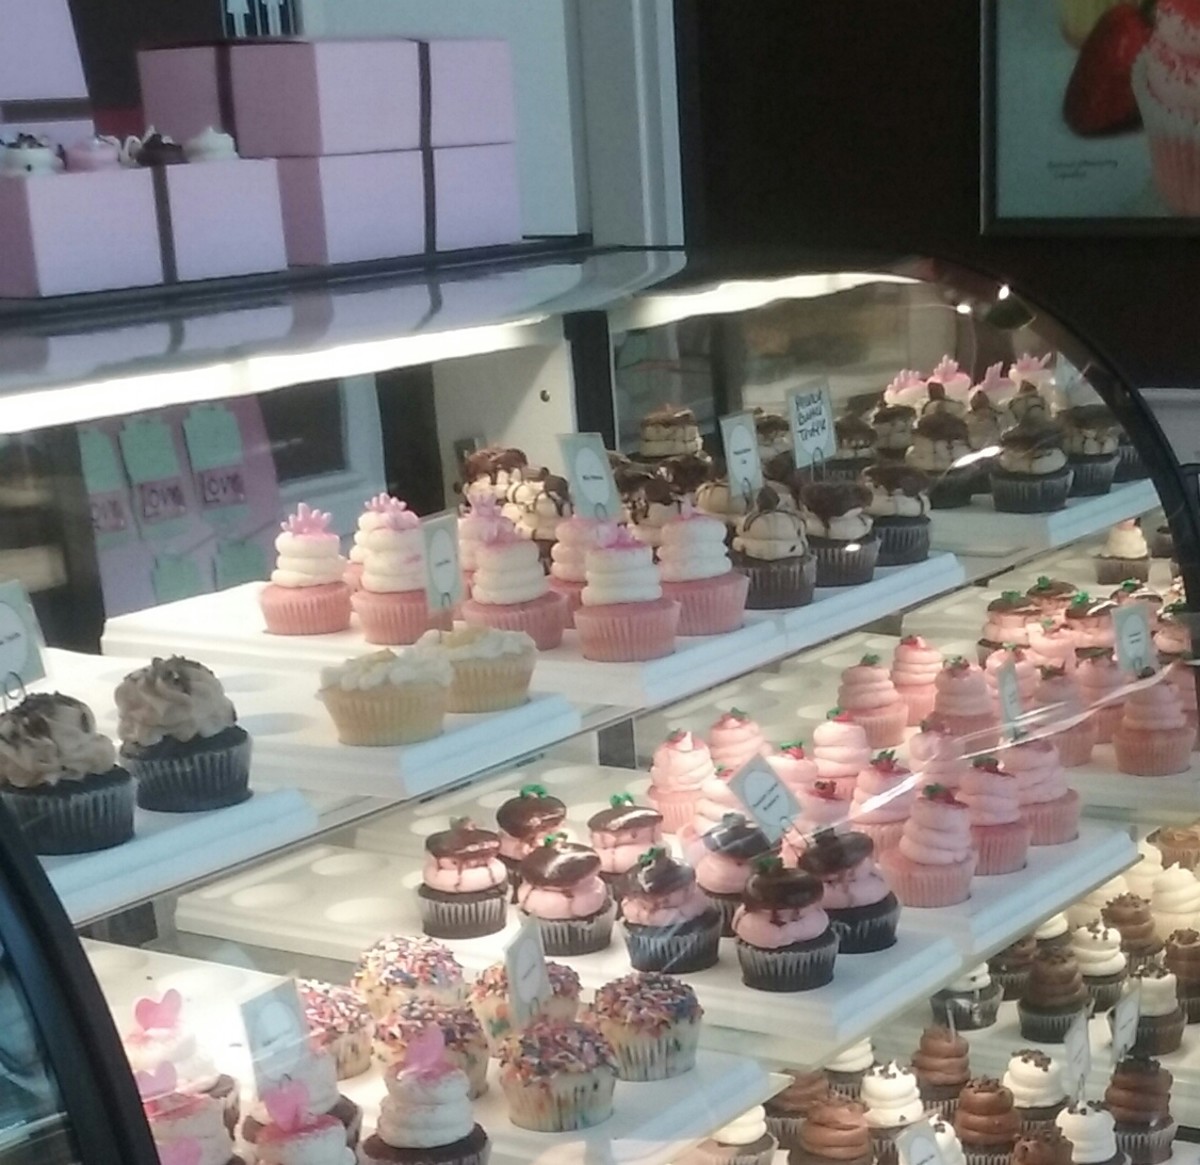 A Review of GIGI'S CUPCAKES in Greensboro, NC